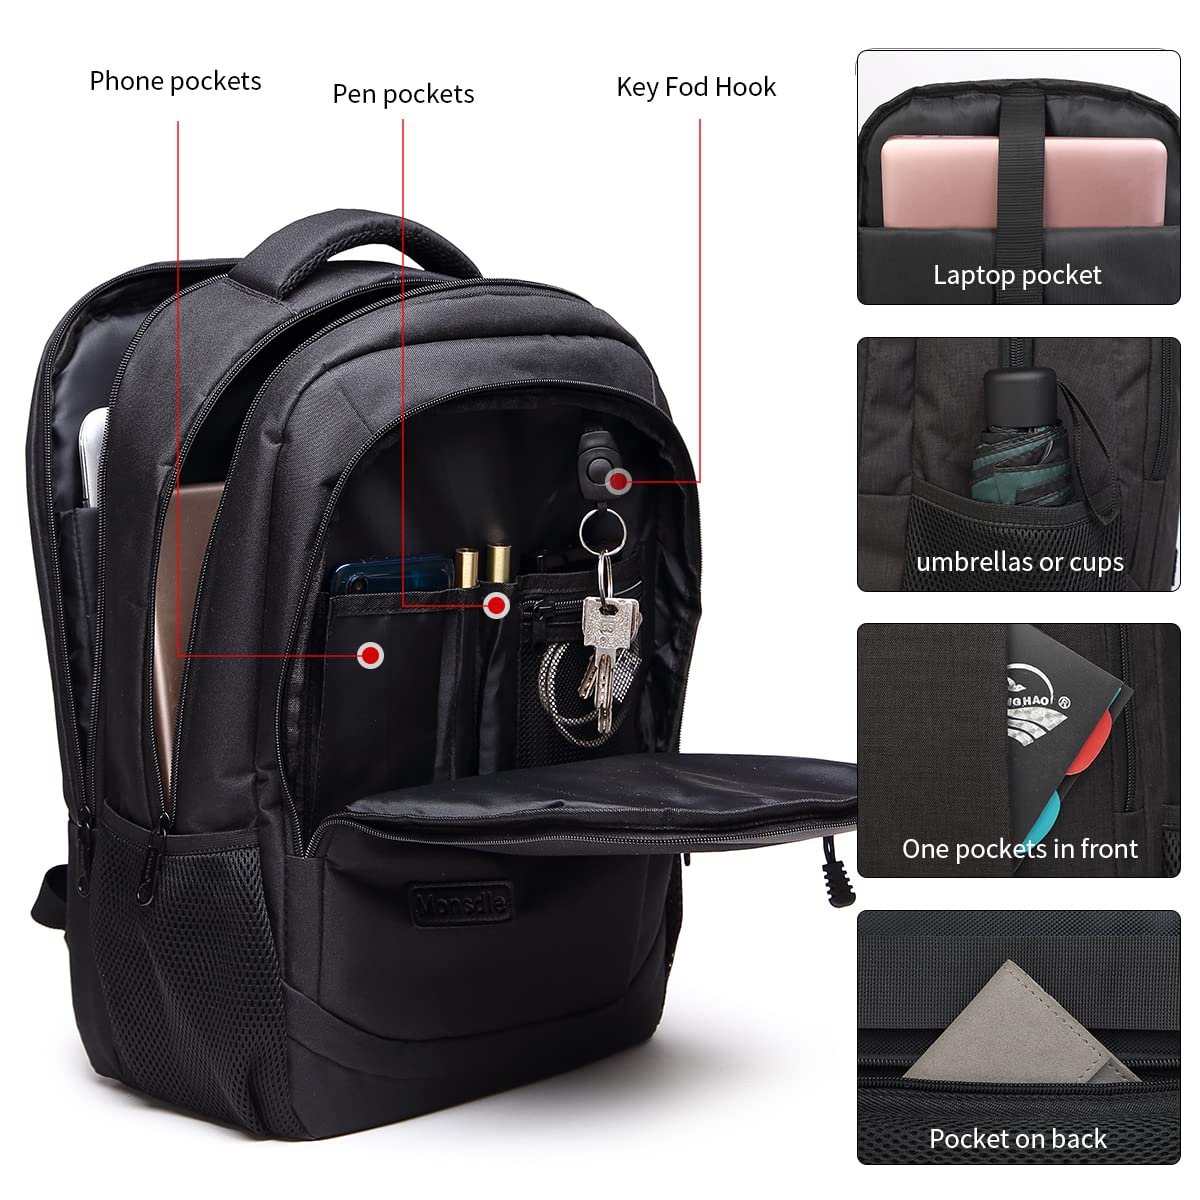 Monsdle Extra Large 50L Travel Laptop Backpack Anti Theft Backpacks with USB Charging Port, Travel Backpacks Business Work Bag 17.3 Inch College Computer Bag for Men Women